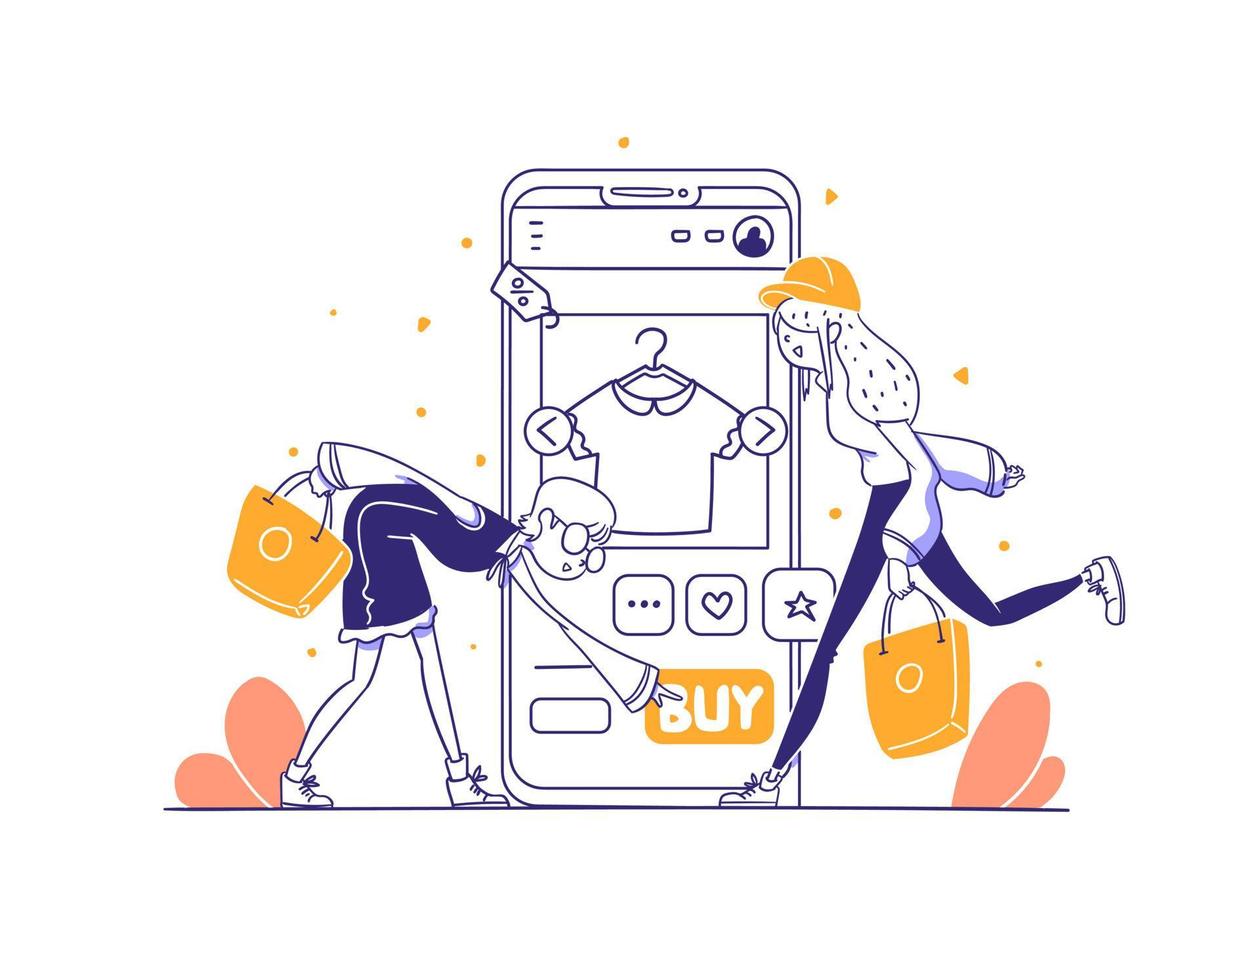 Girls Choose and Buy Fashion Sale Product in Online Shop Concept Illustration in Outline Hand Drawn Design Style vector